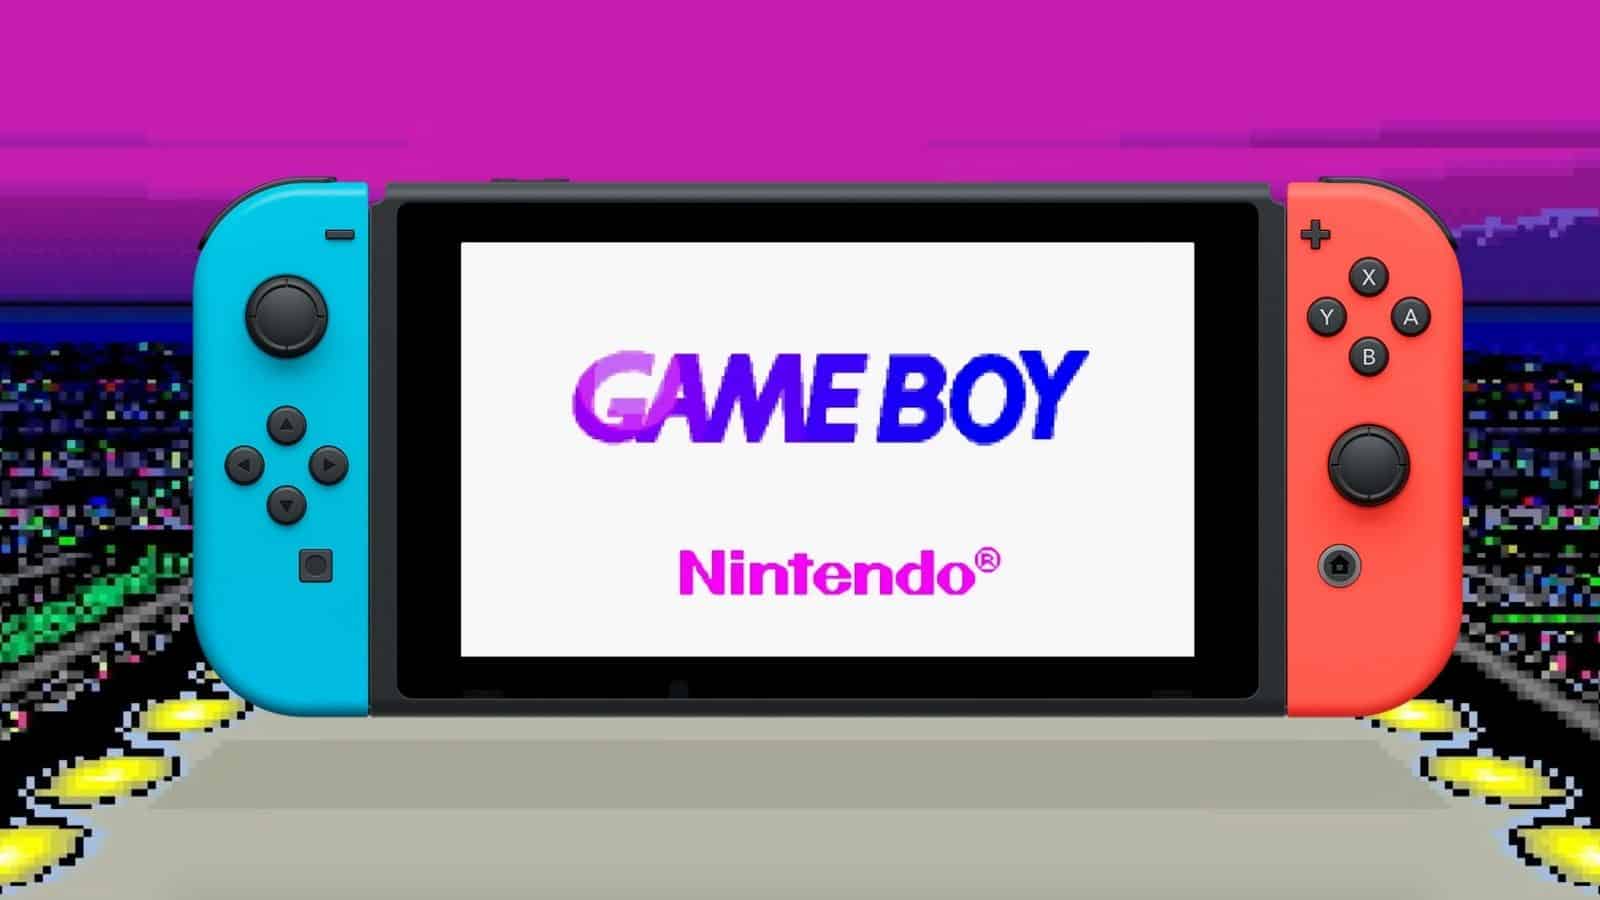 A quick look at the Switch's new Game Boy and Game Boy Advance emulation